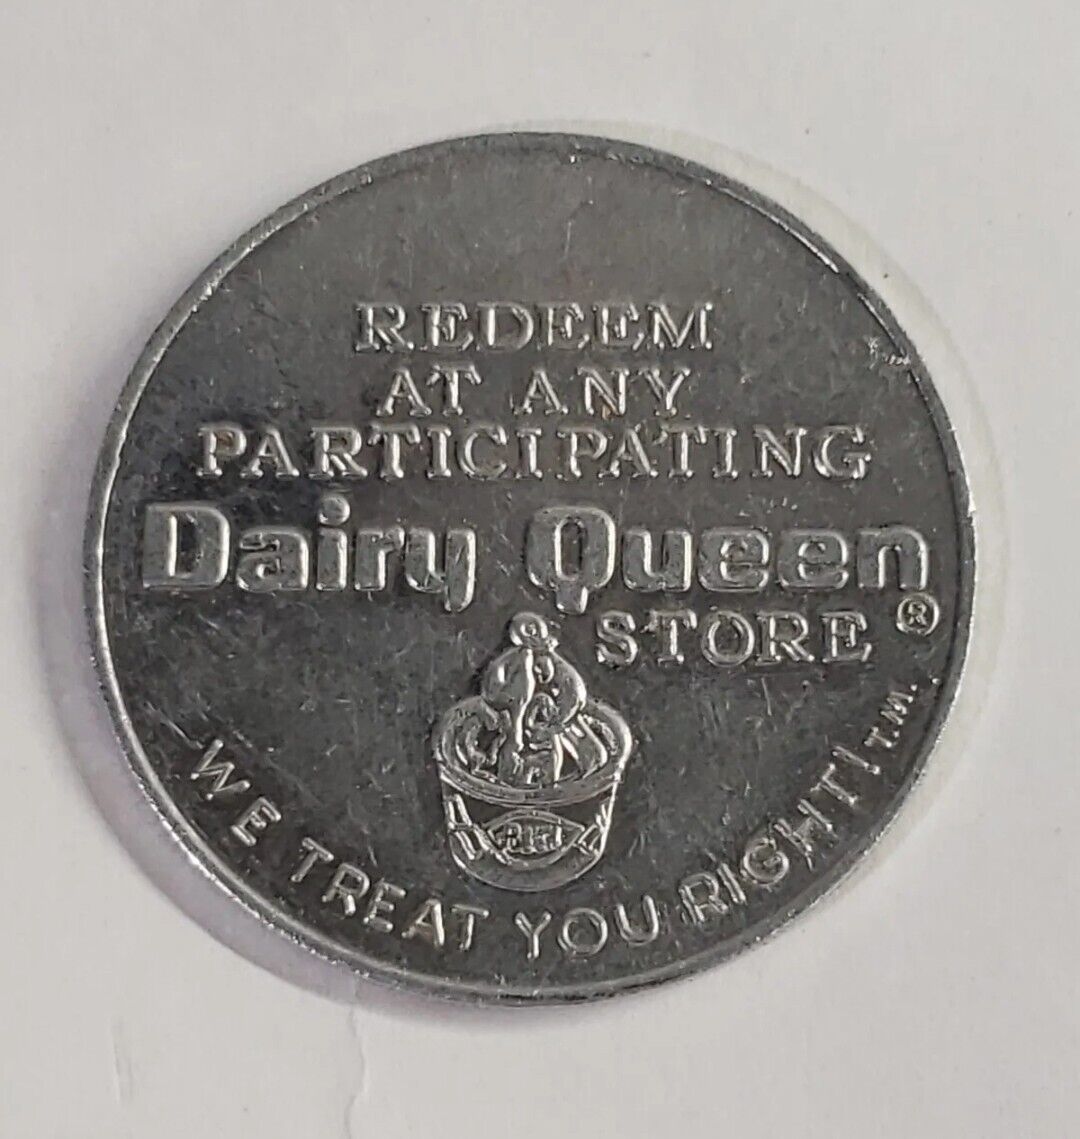 Vintage Advertising Dairy Queen Free Sundae or 40 Cents Off Royal Treat Token